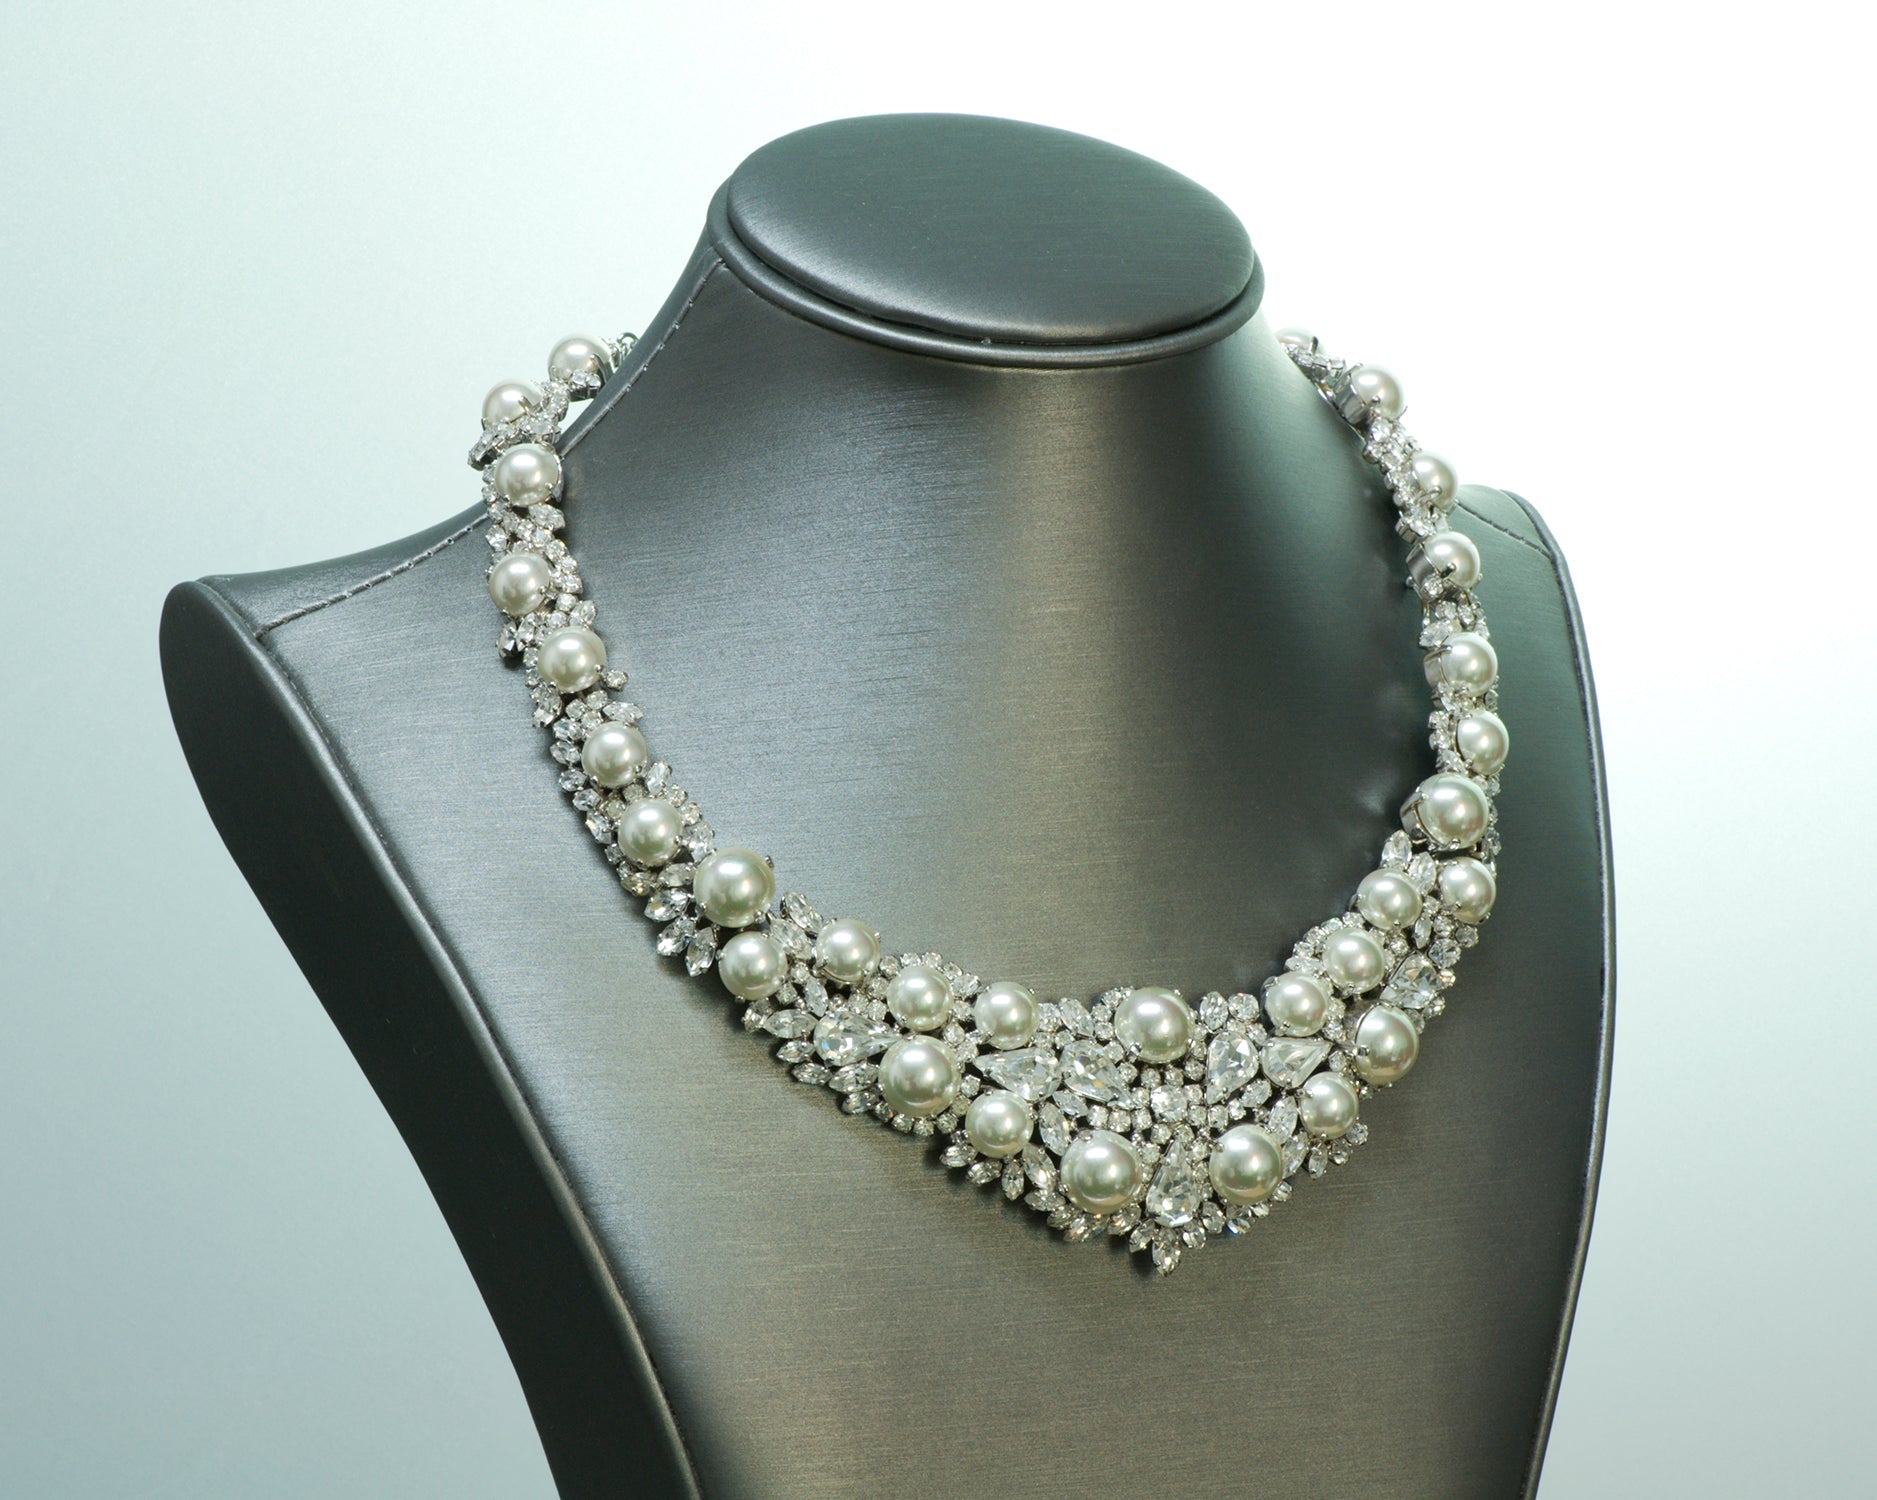 Christian Dior Necklace - DSF Antique Jewelry